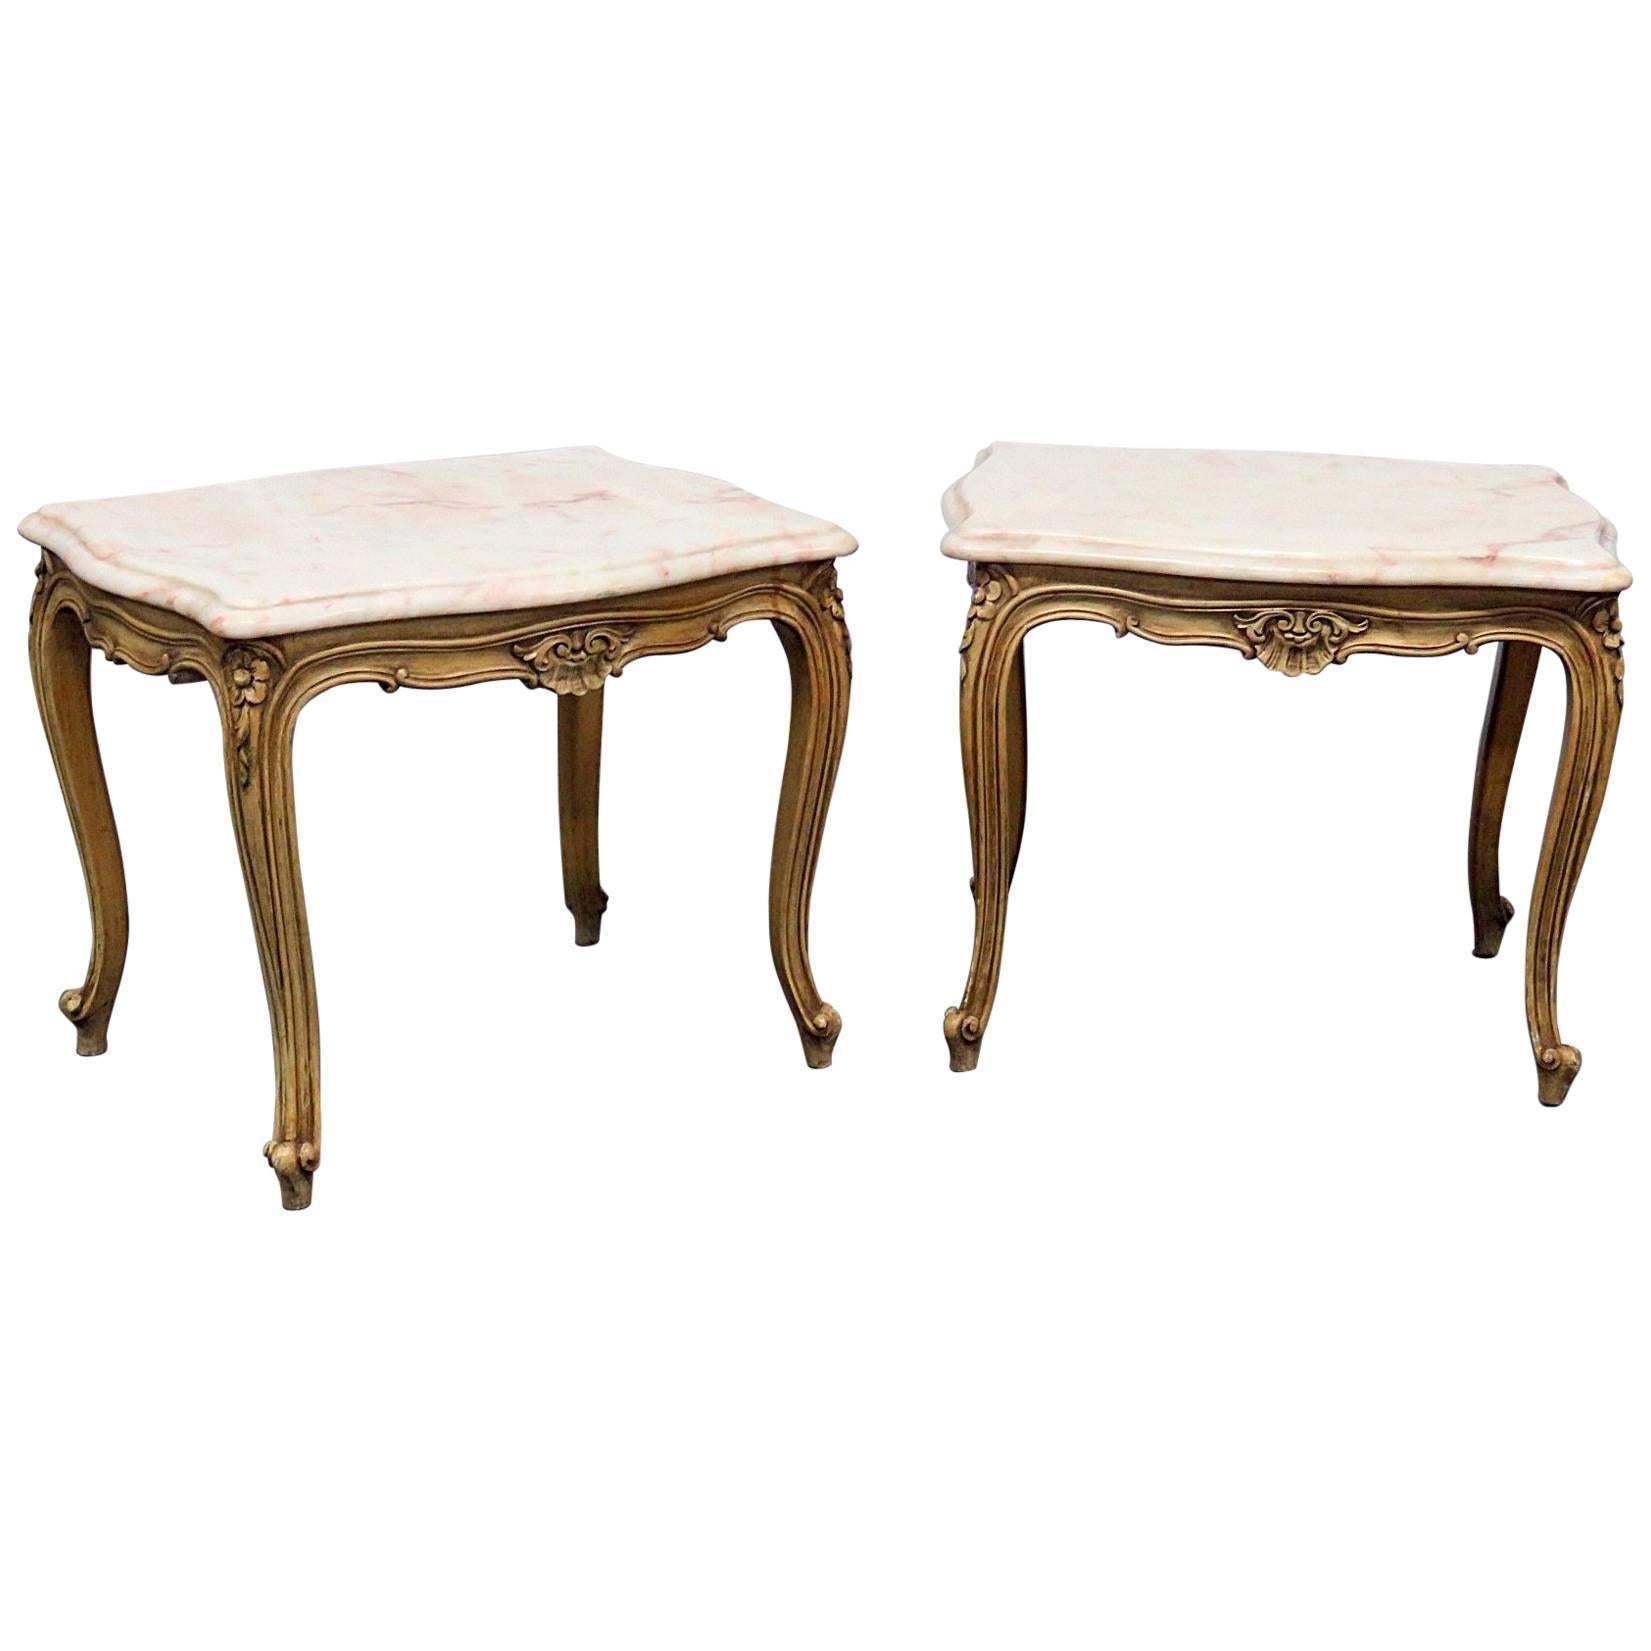 Pair of French Provincial Style Marble-Top End Tables